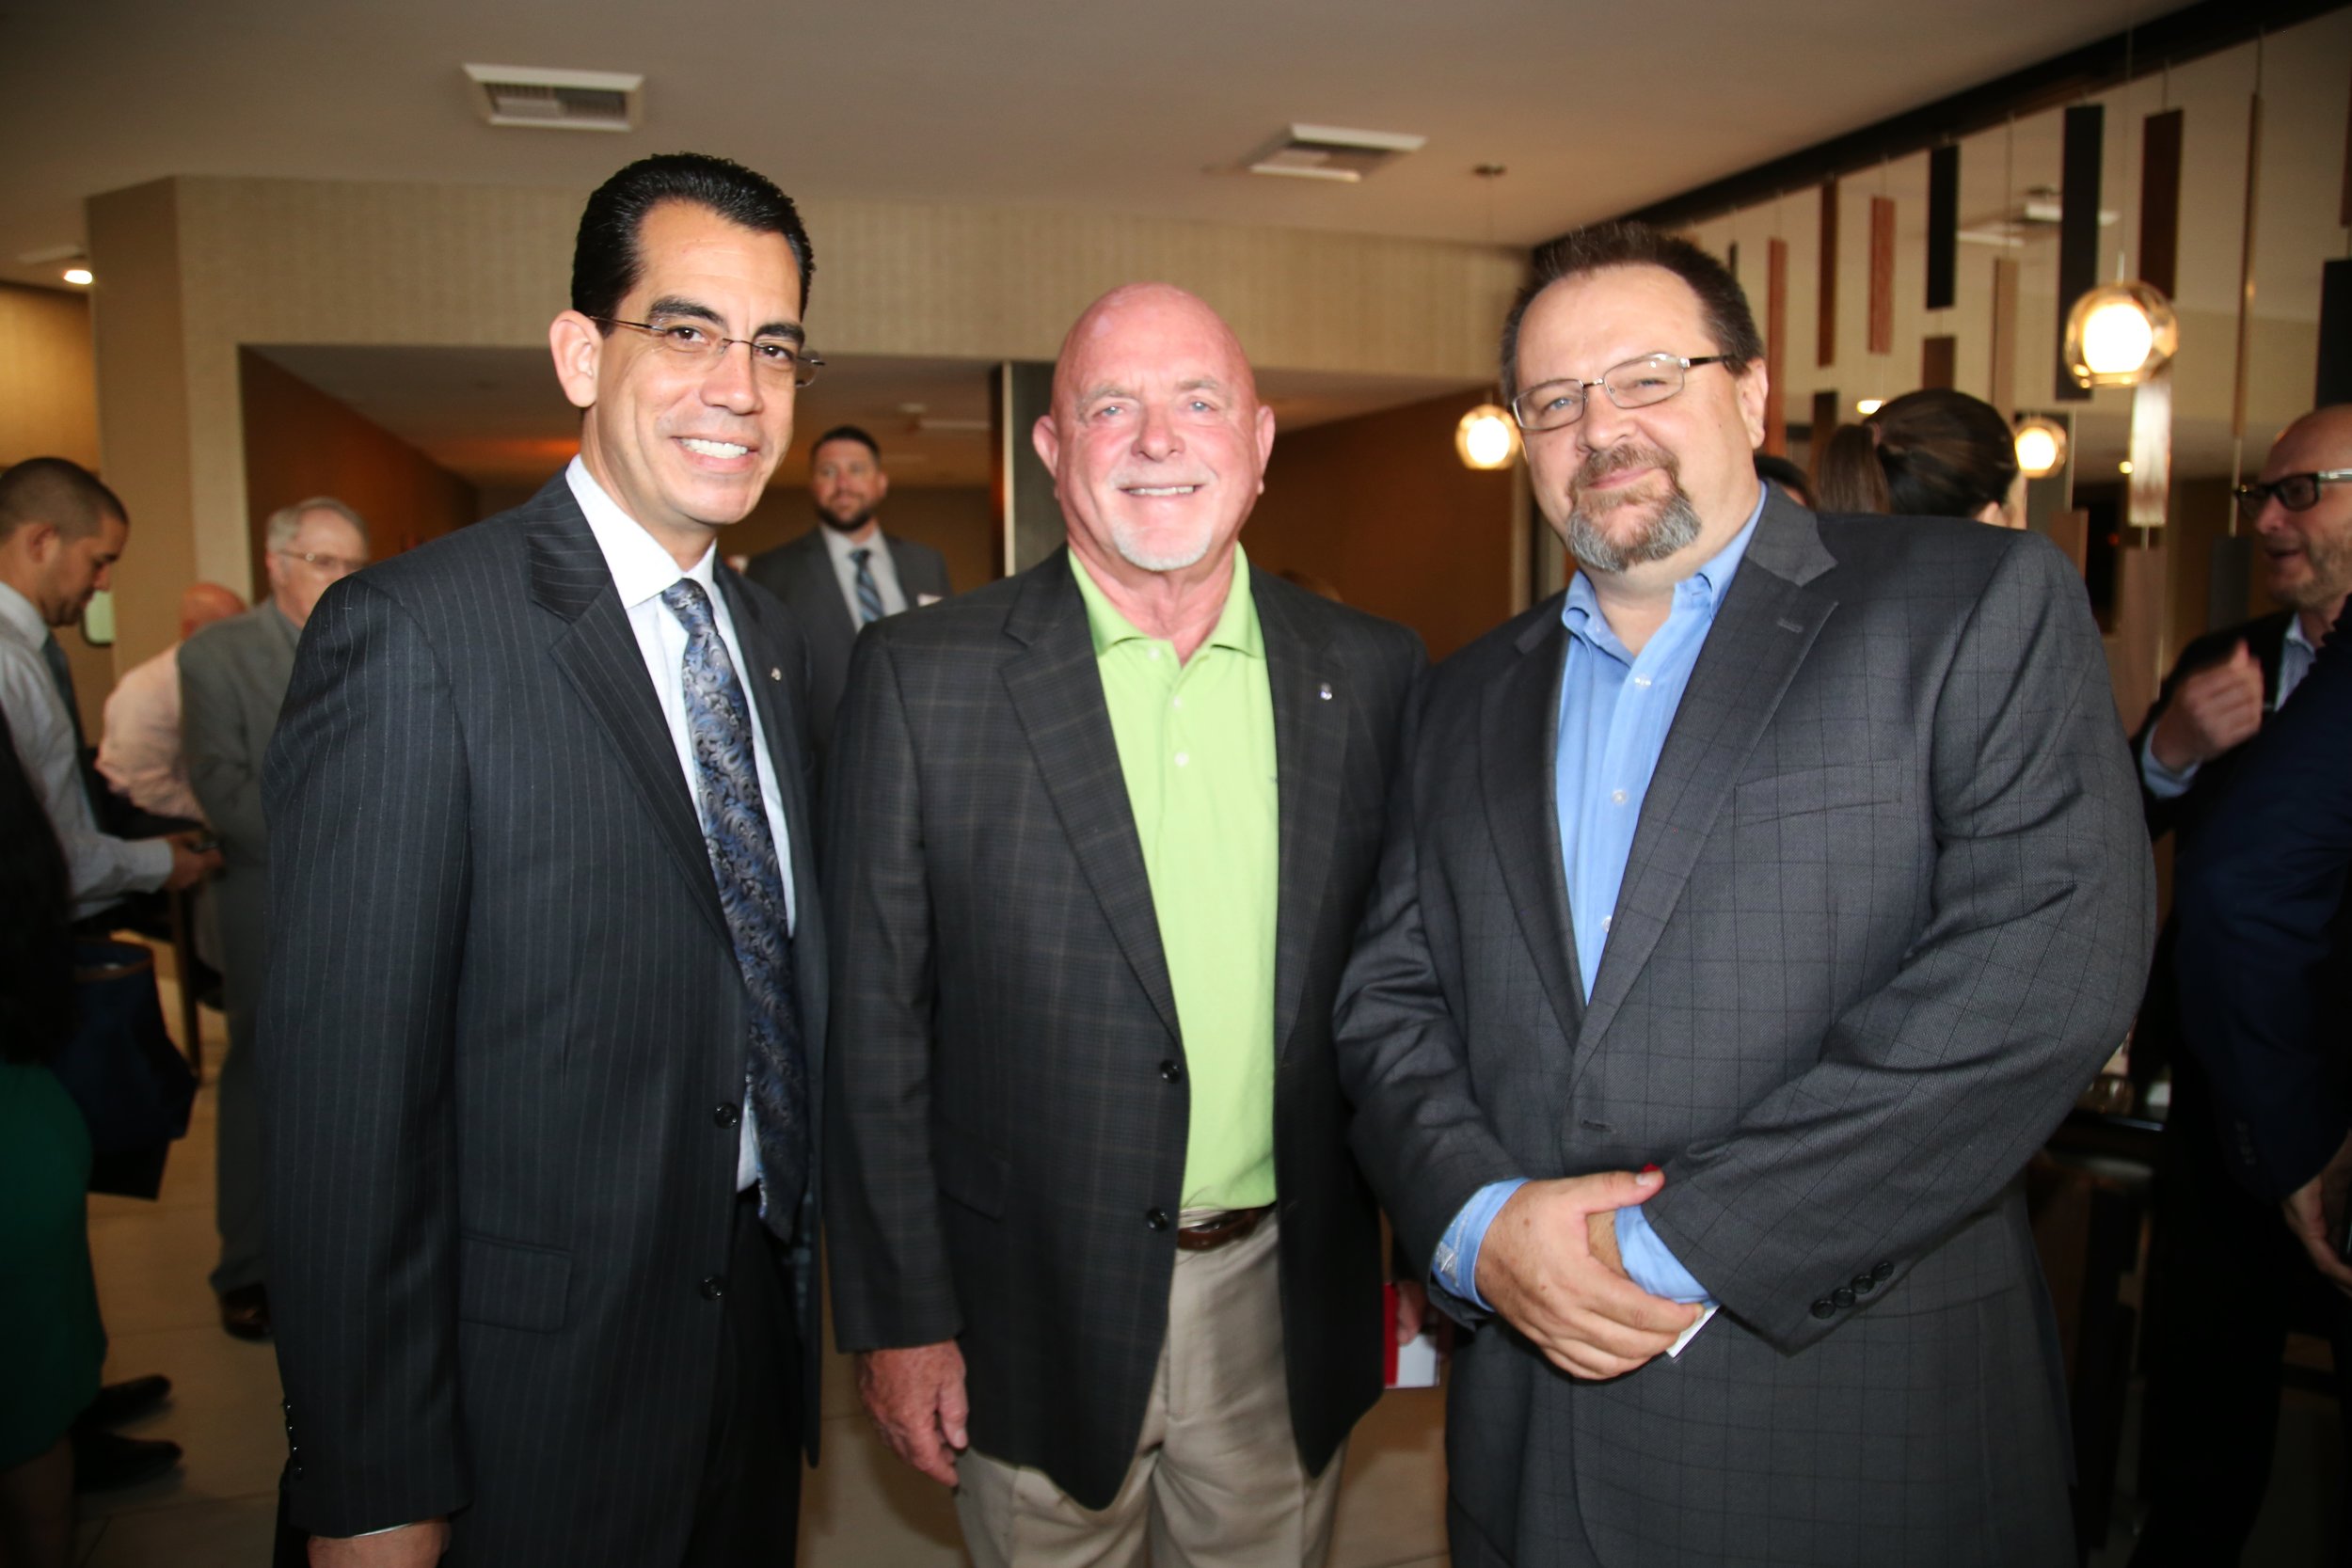   (From left to right)  CEO Carlos Rodriguez, Rancho Cucamonga Mayor L. Dennis Michael, BIABV President Phil Burum 